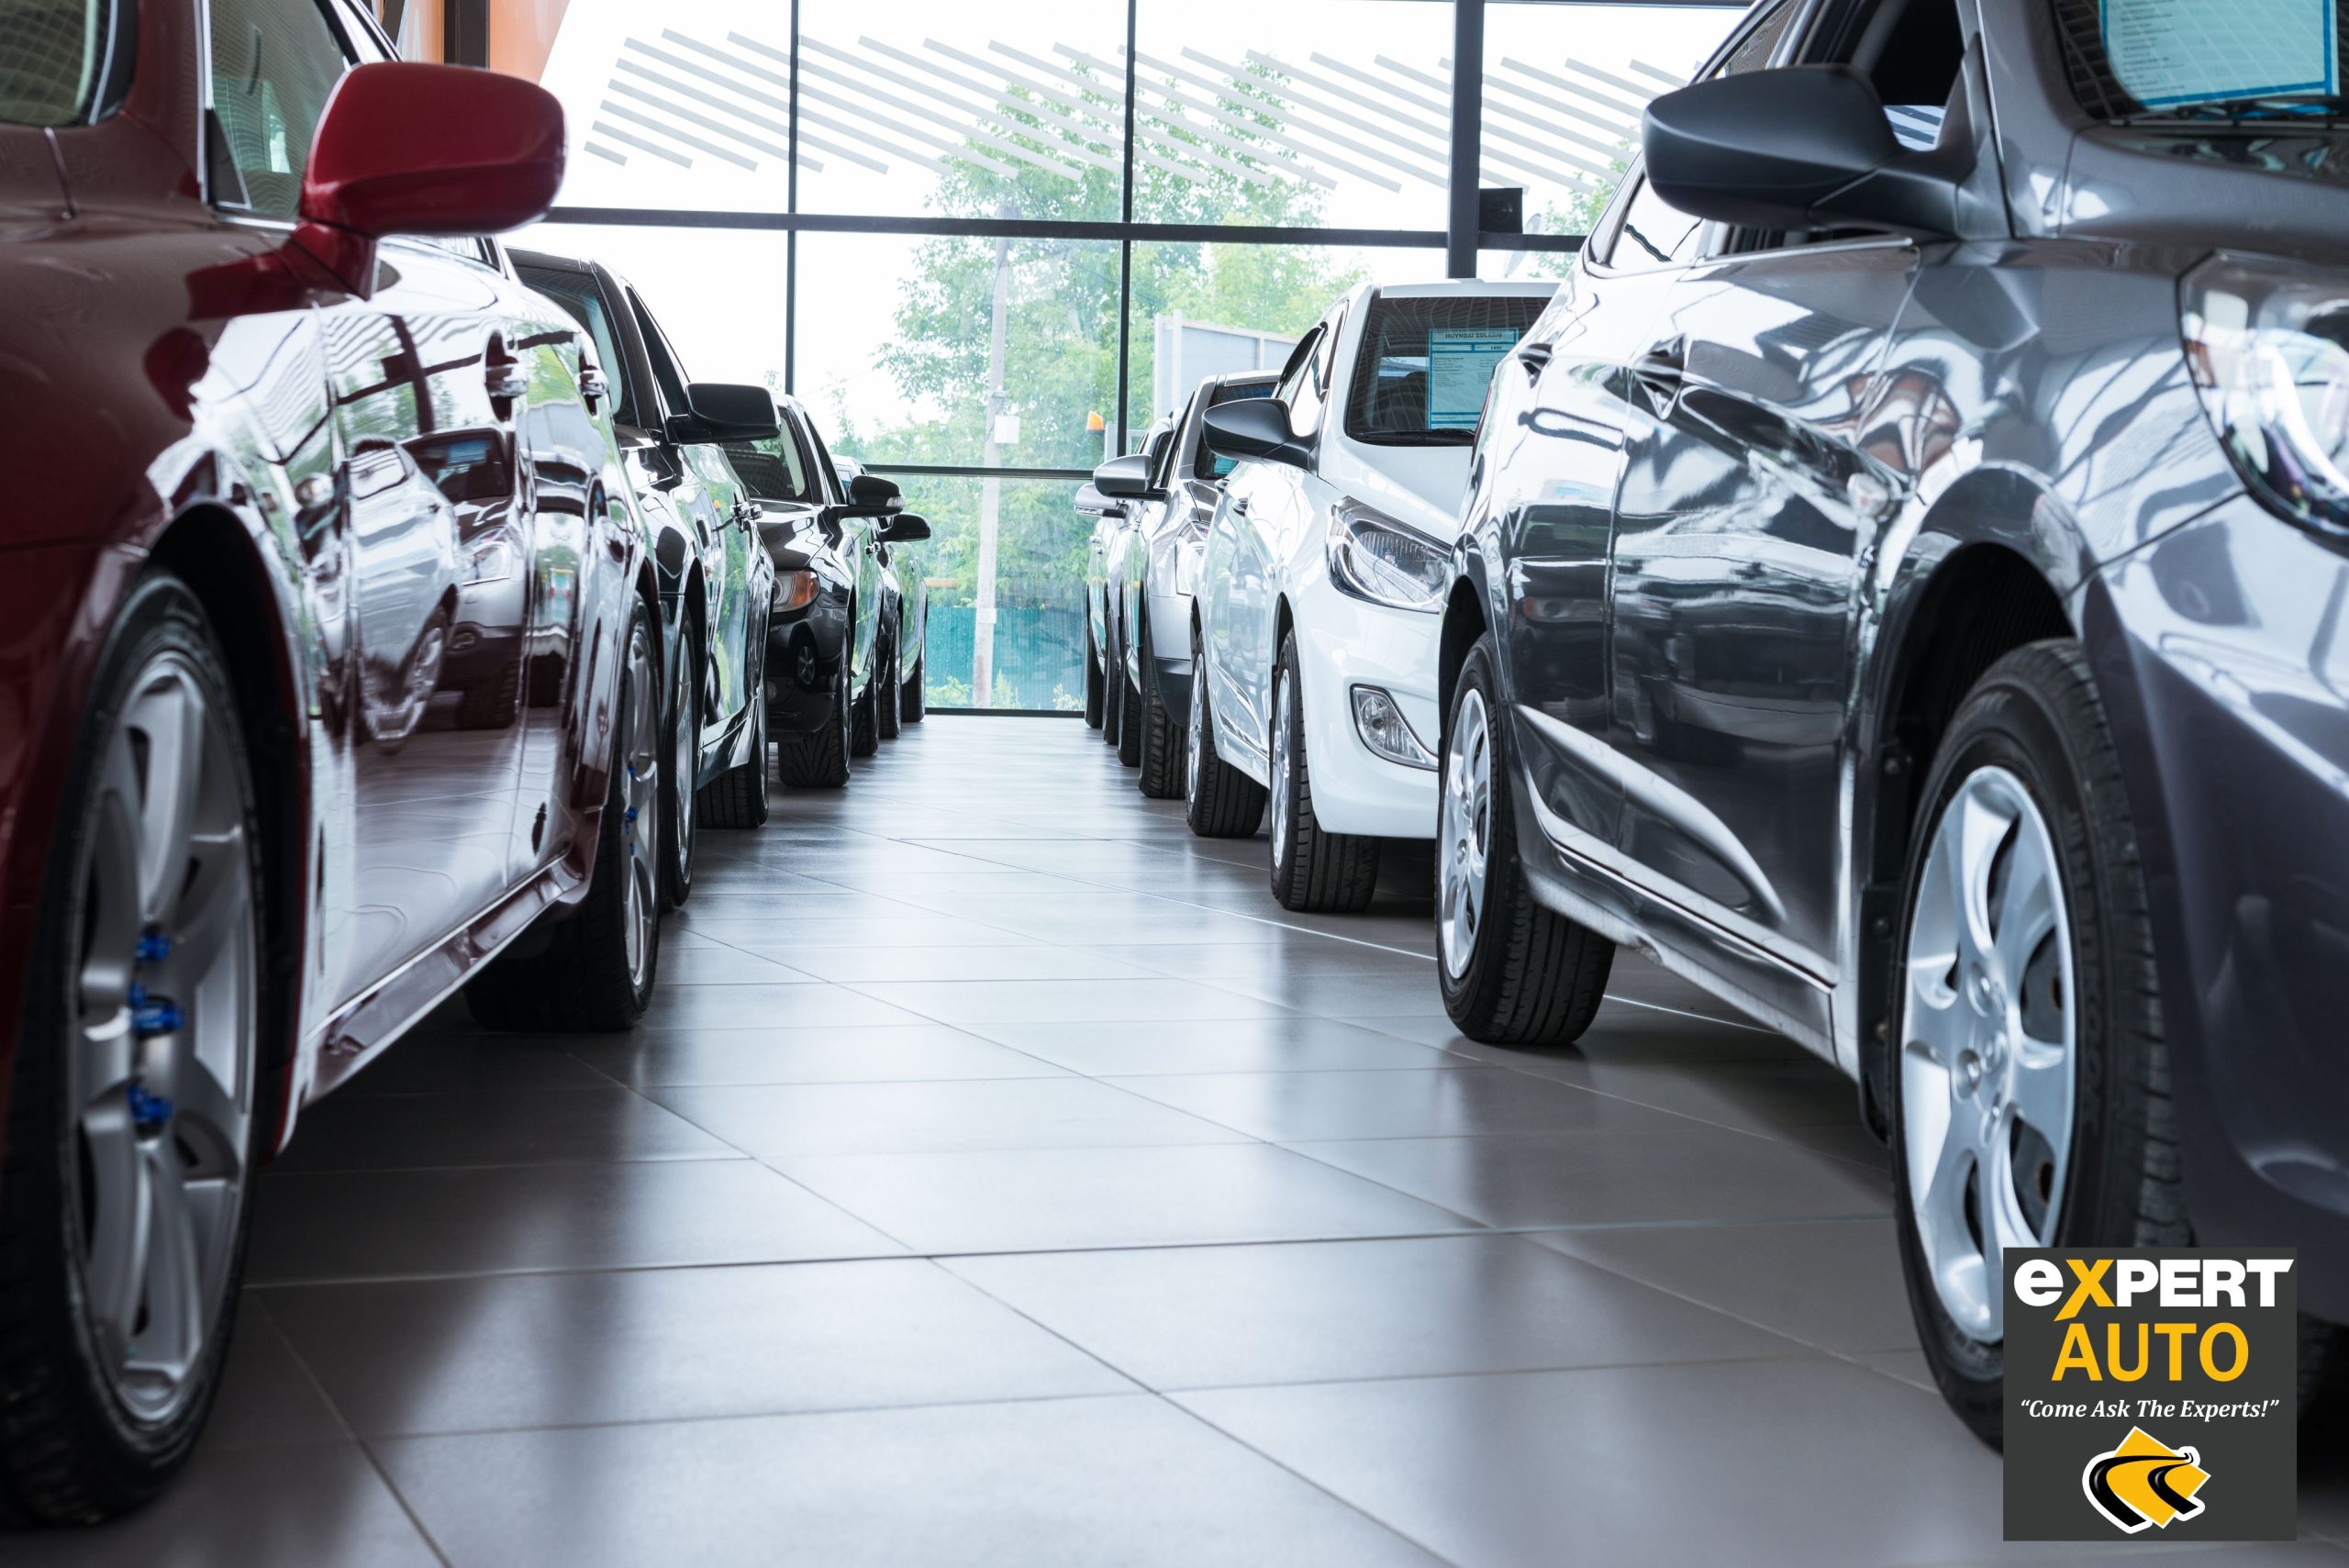 Our Auto Dealership Near Alexandria Offers Many Benefits